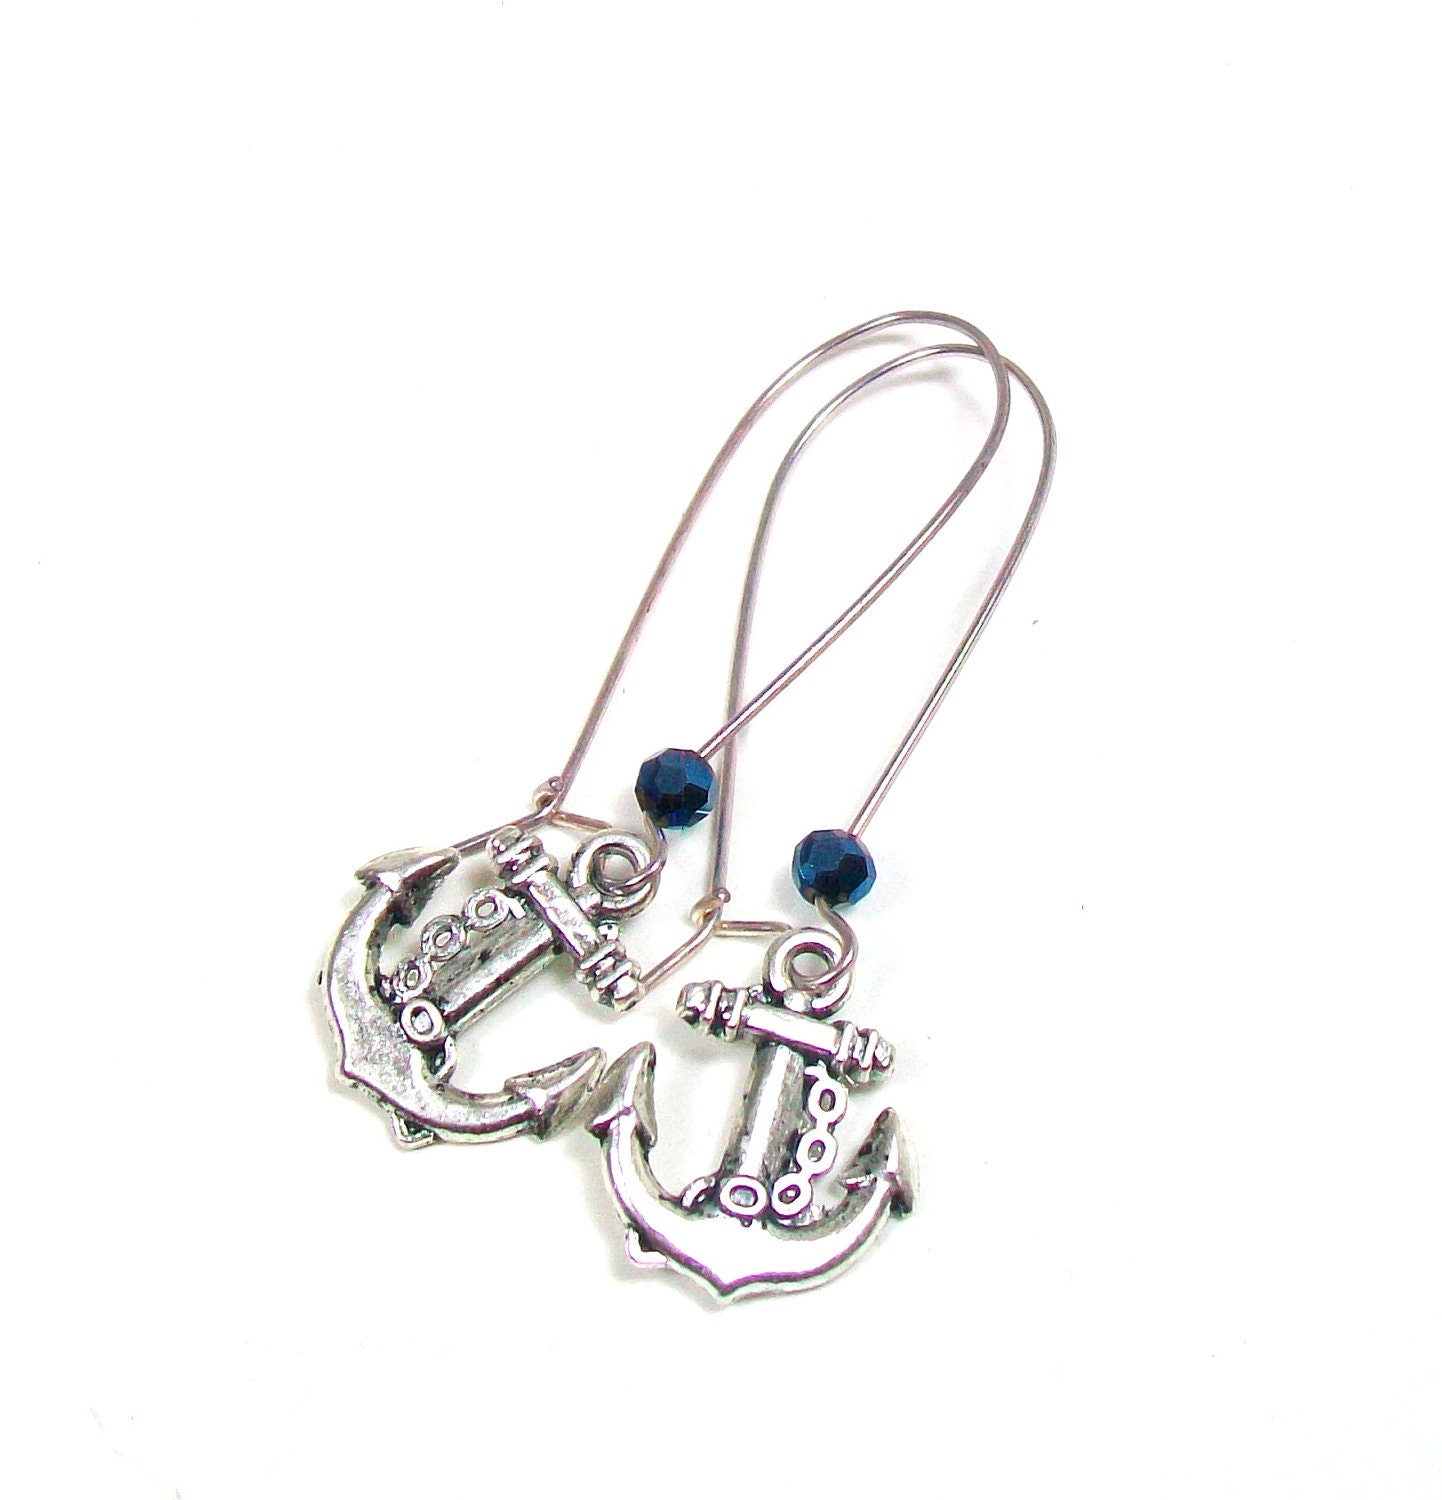 Anchor Earrings on Anchor Earrings Nautical Earrings Anchor Jewelry By Prdgy On Etsy